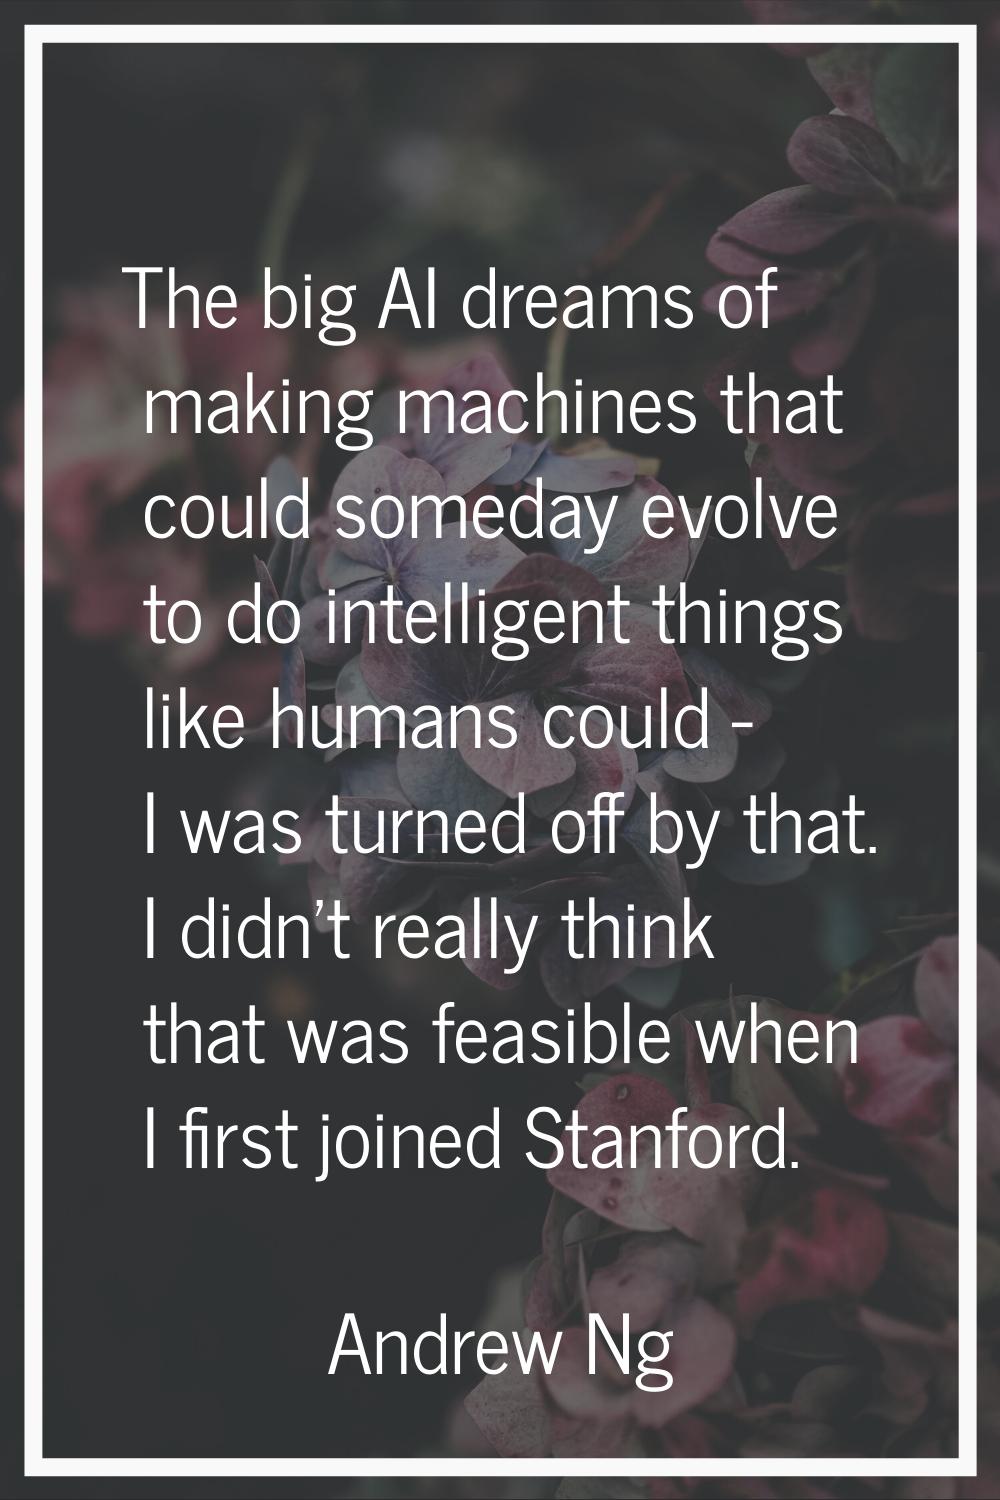 The big AI dreams of making machines that could someday evolve to do intelligent things like humans